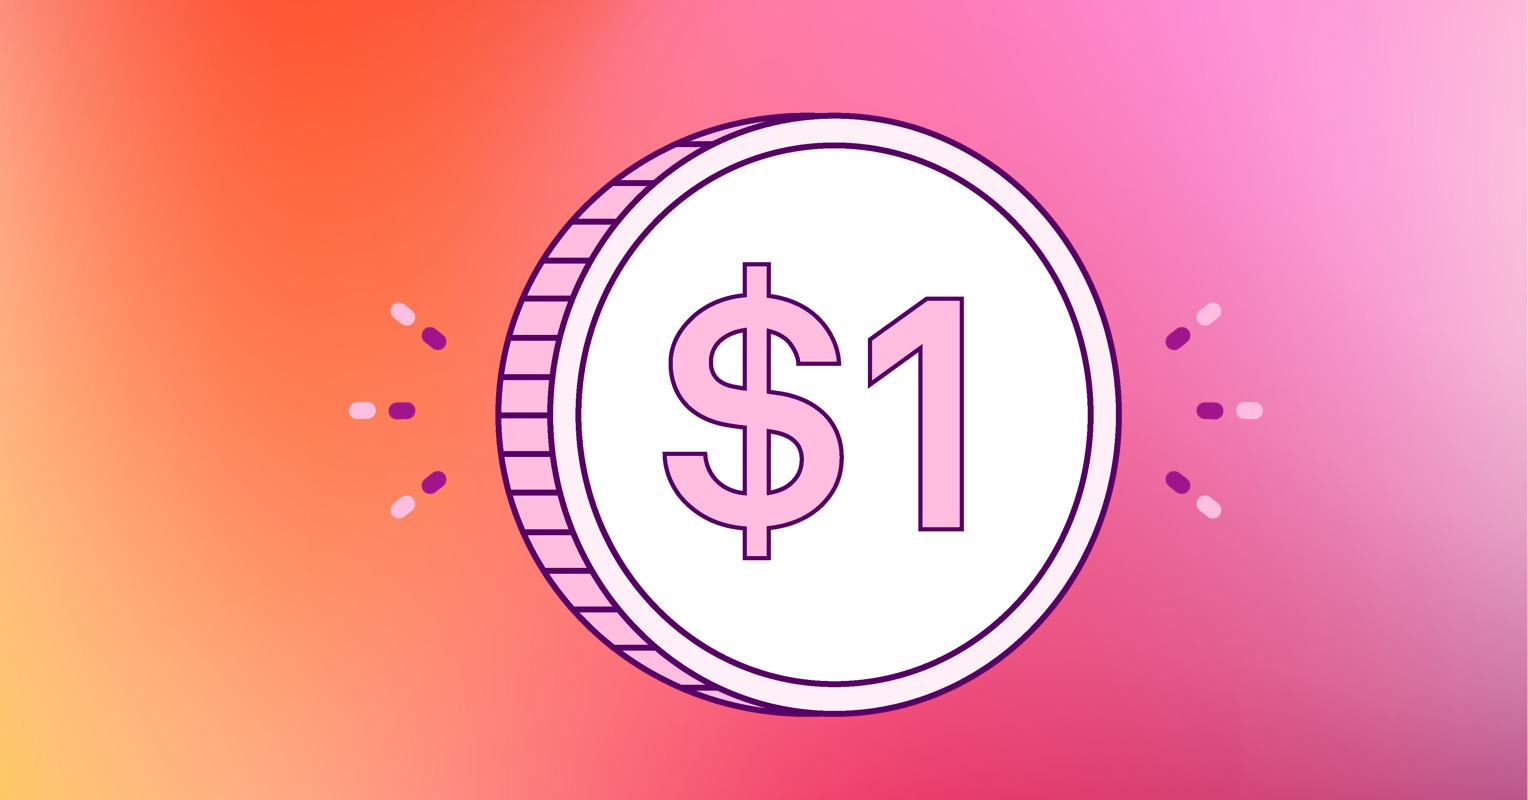 Illustration of a 1 Dollar coin over a Telstra background